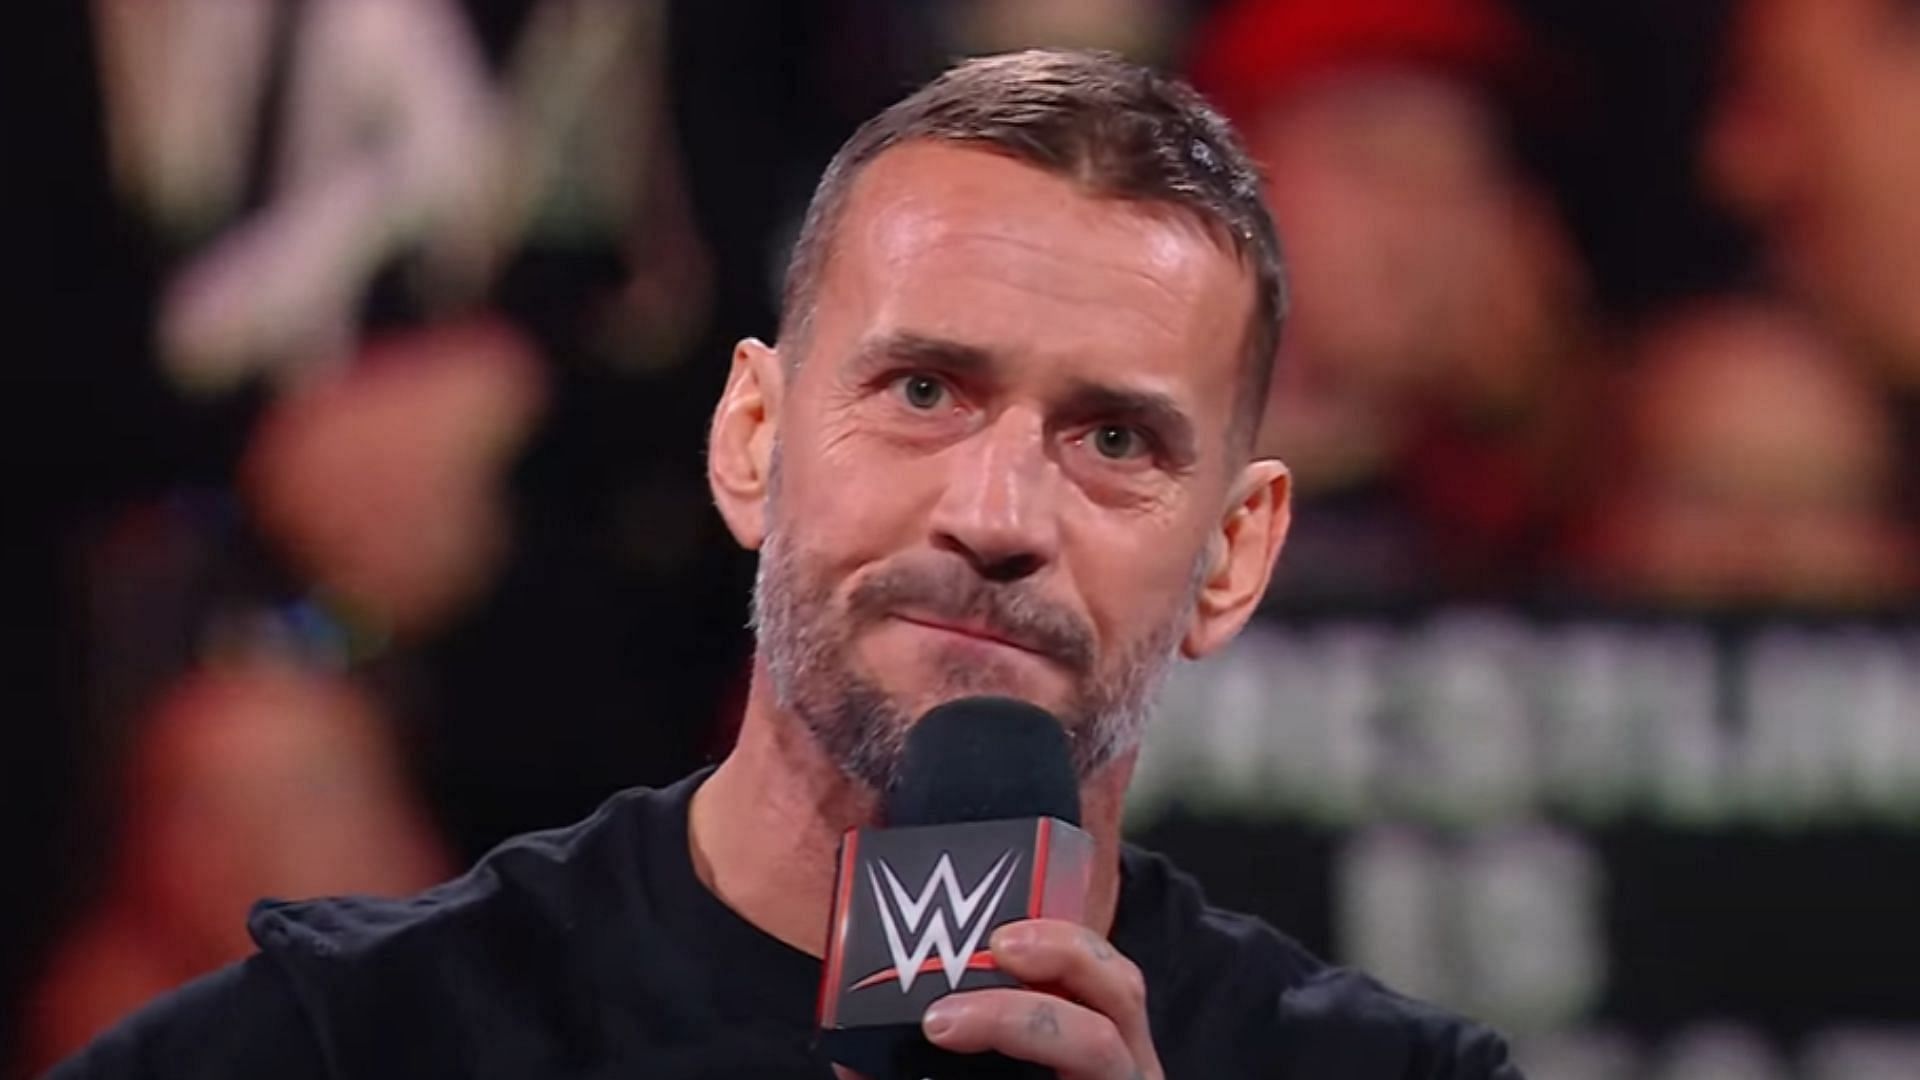 CM Punk is a two-time WWE Champion